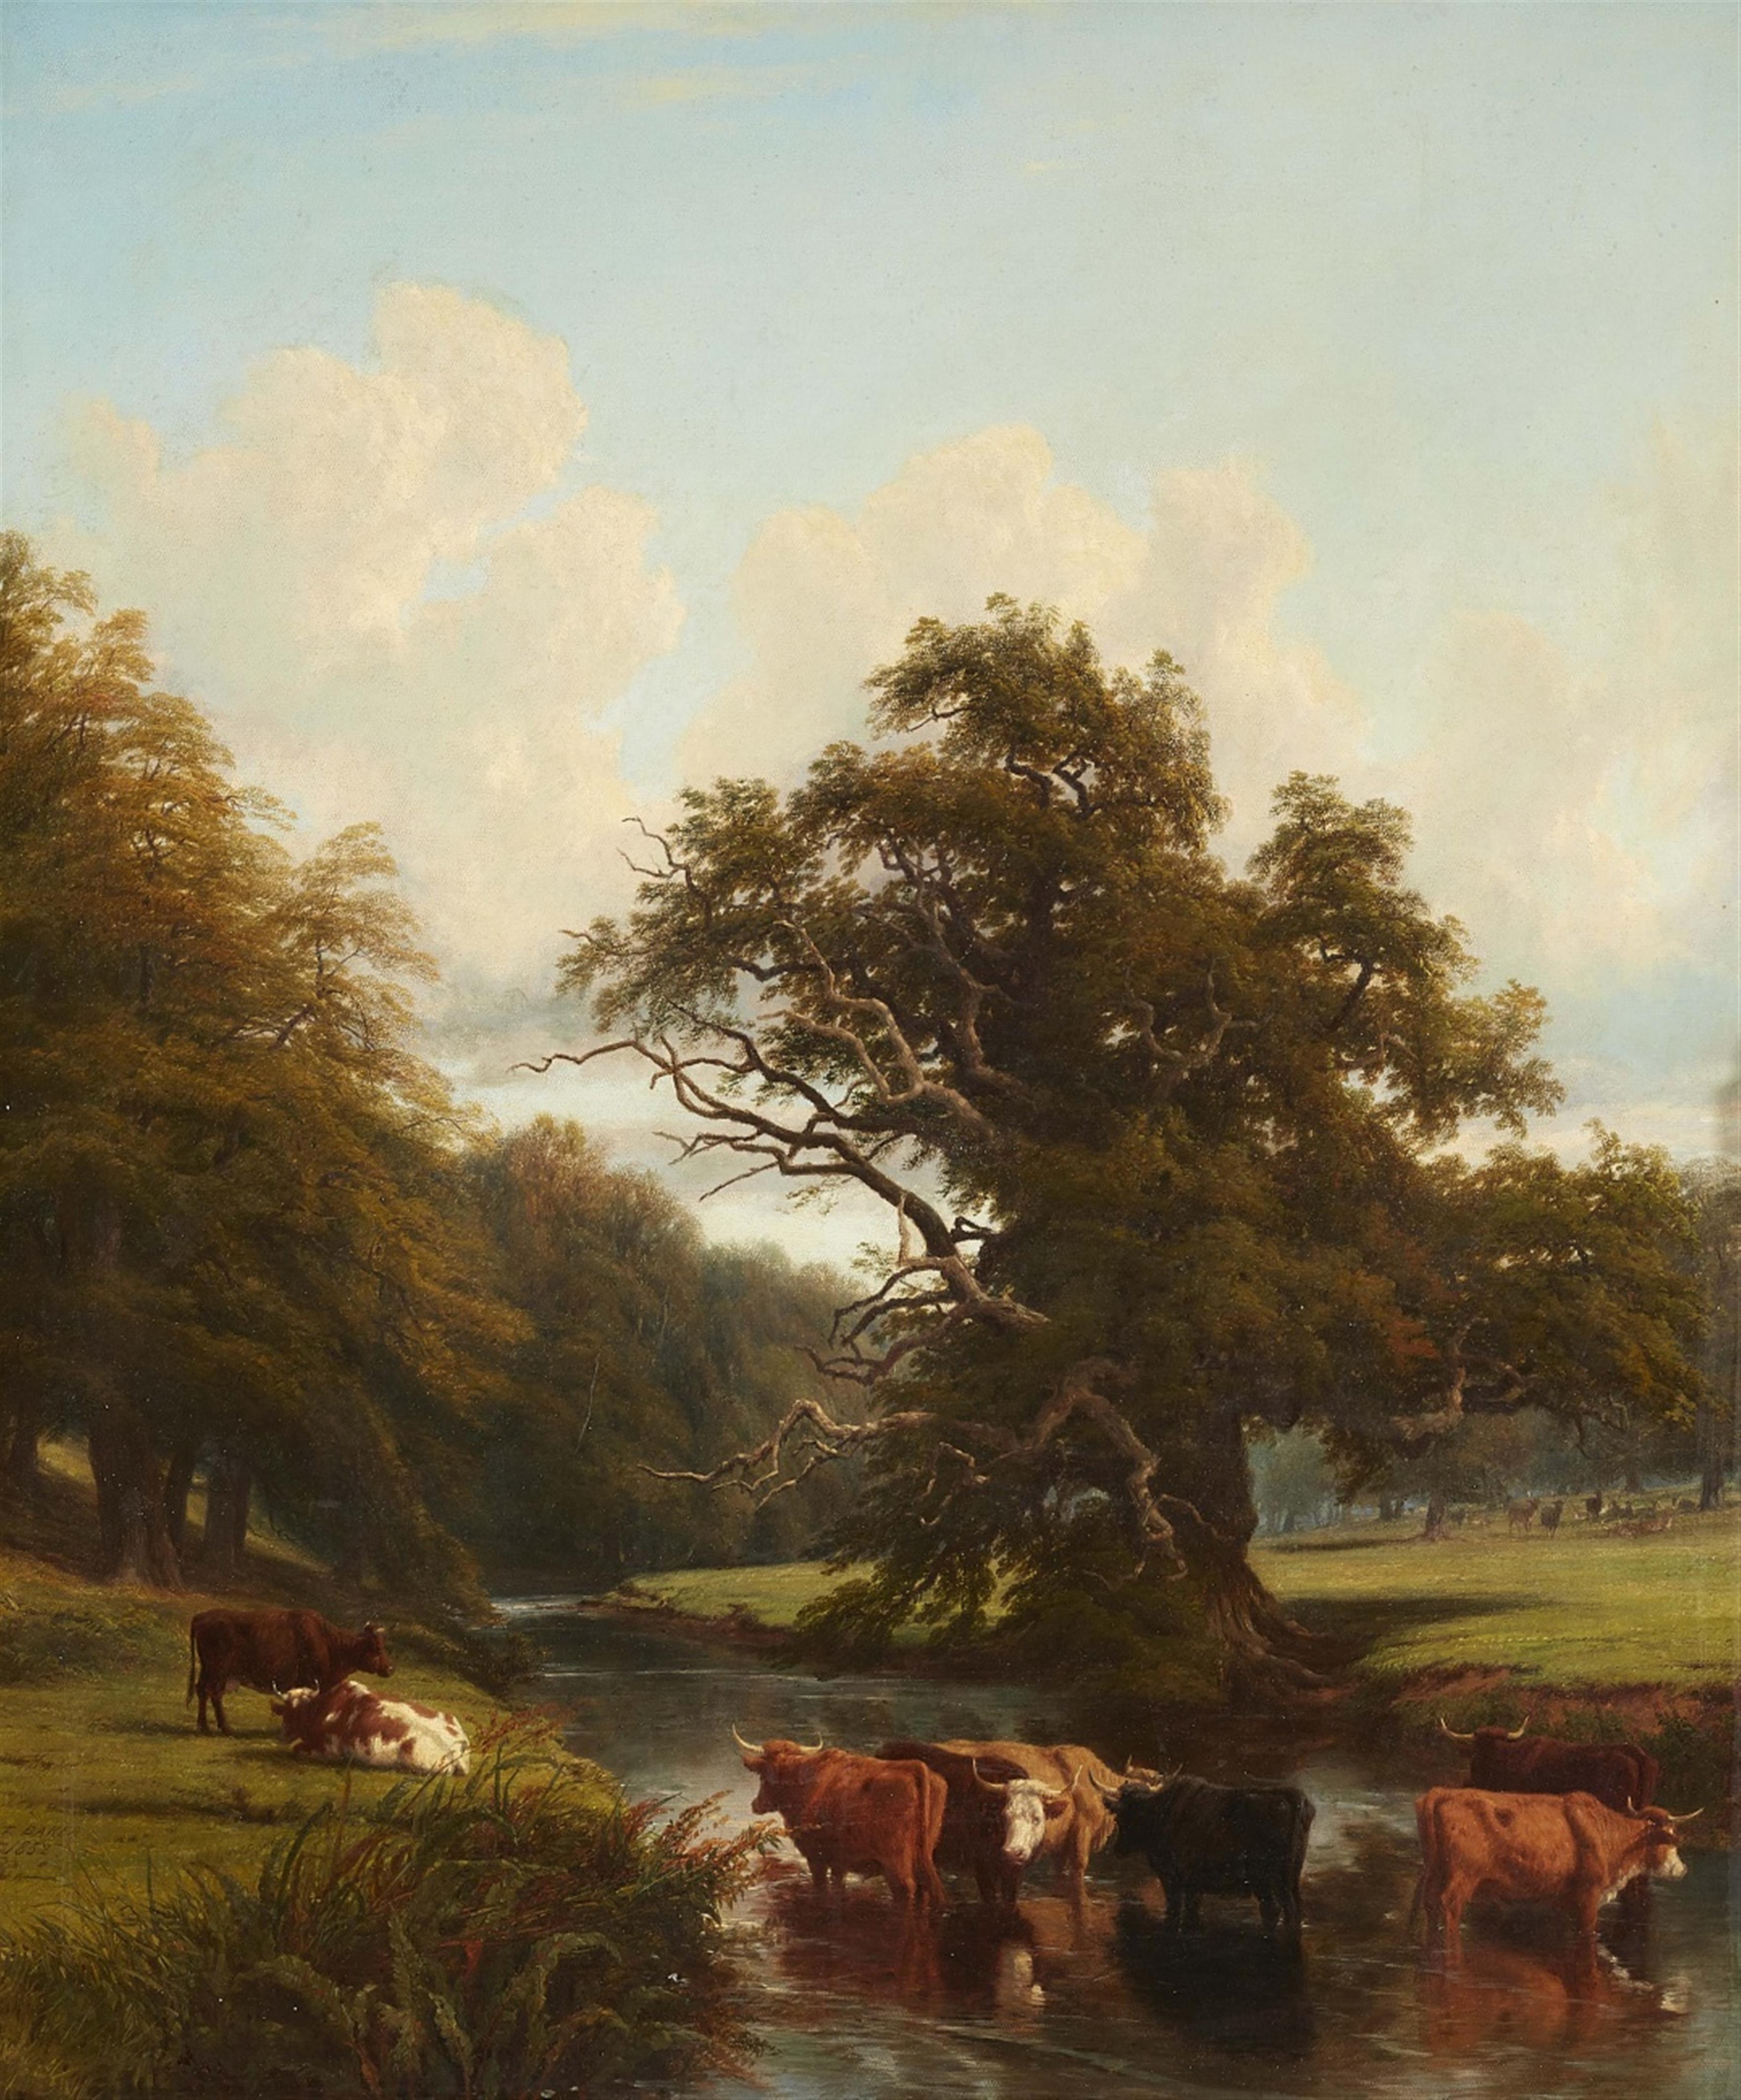 Thomas Baker - River Landscape with a Herd of Cattle - image-1